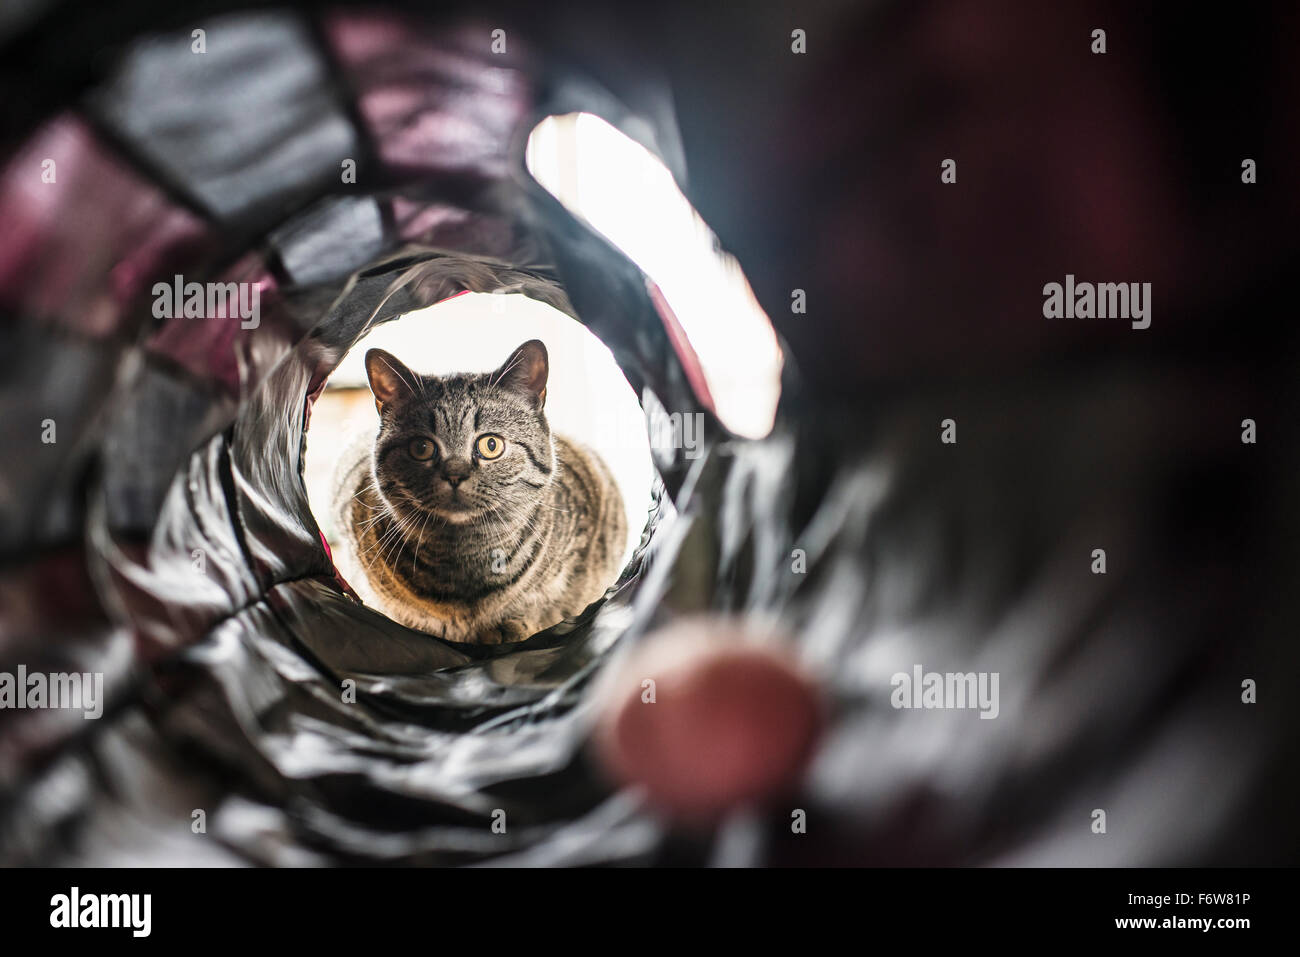 Playful cat on adventure. Playing inside pet toy, looking at camera. Stock Photo